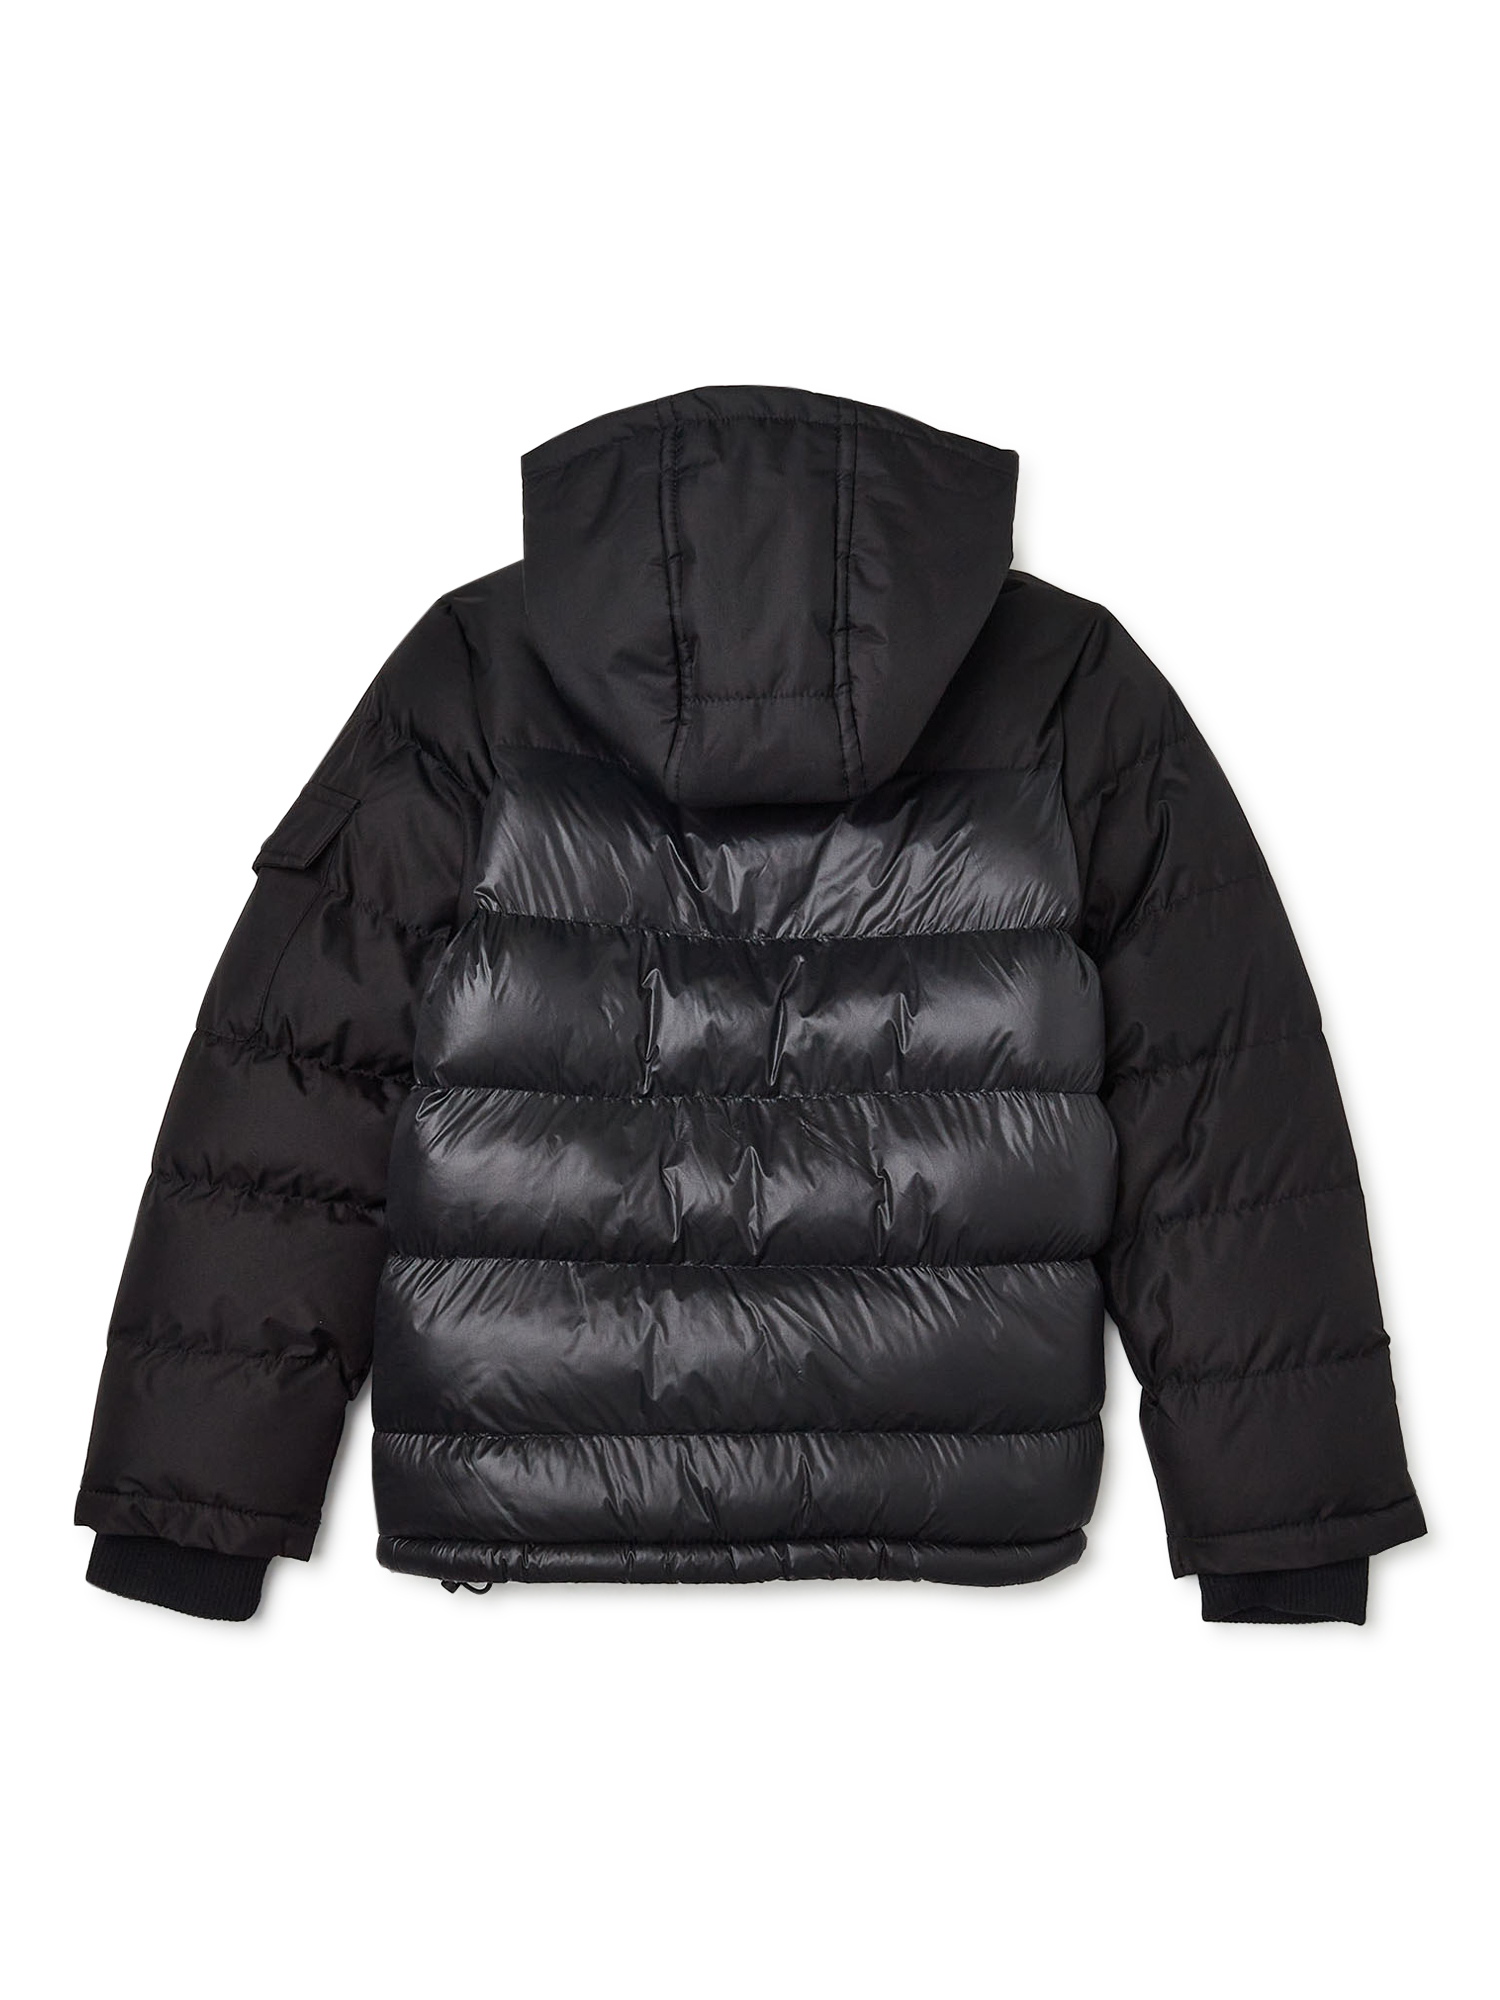 Beverly Hills polo Club Boys Logo Puffer Coat, Sizes 8-20 - image 2 of 3